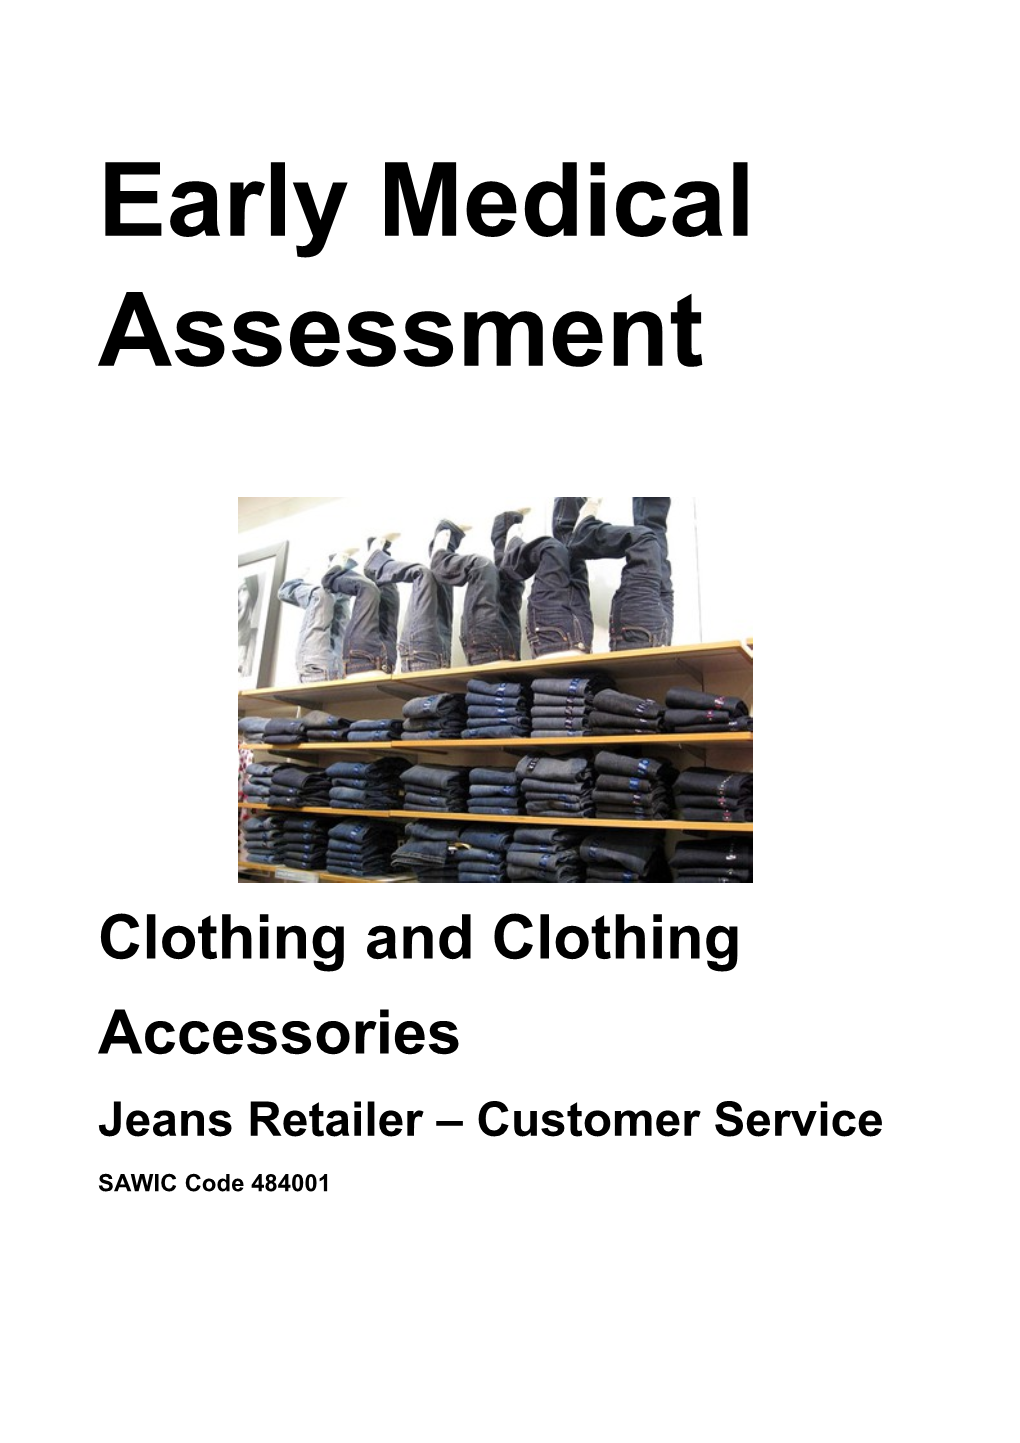 Clothing and Clothing Accessories Retailing - Customer Service - Jeans Retailer